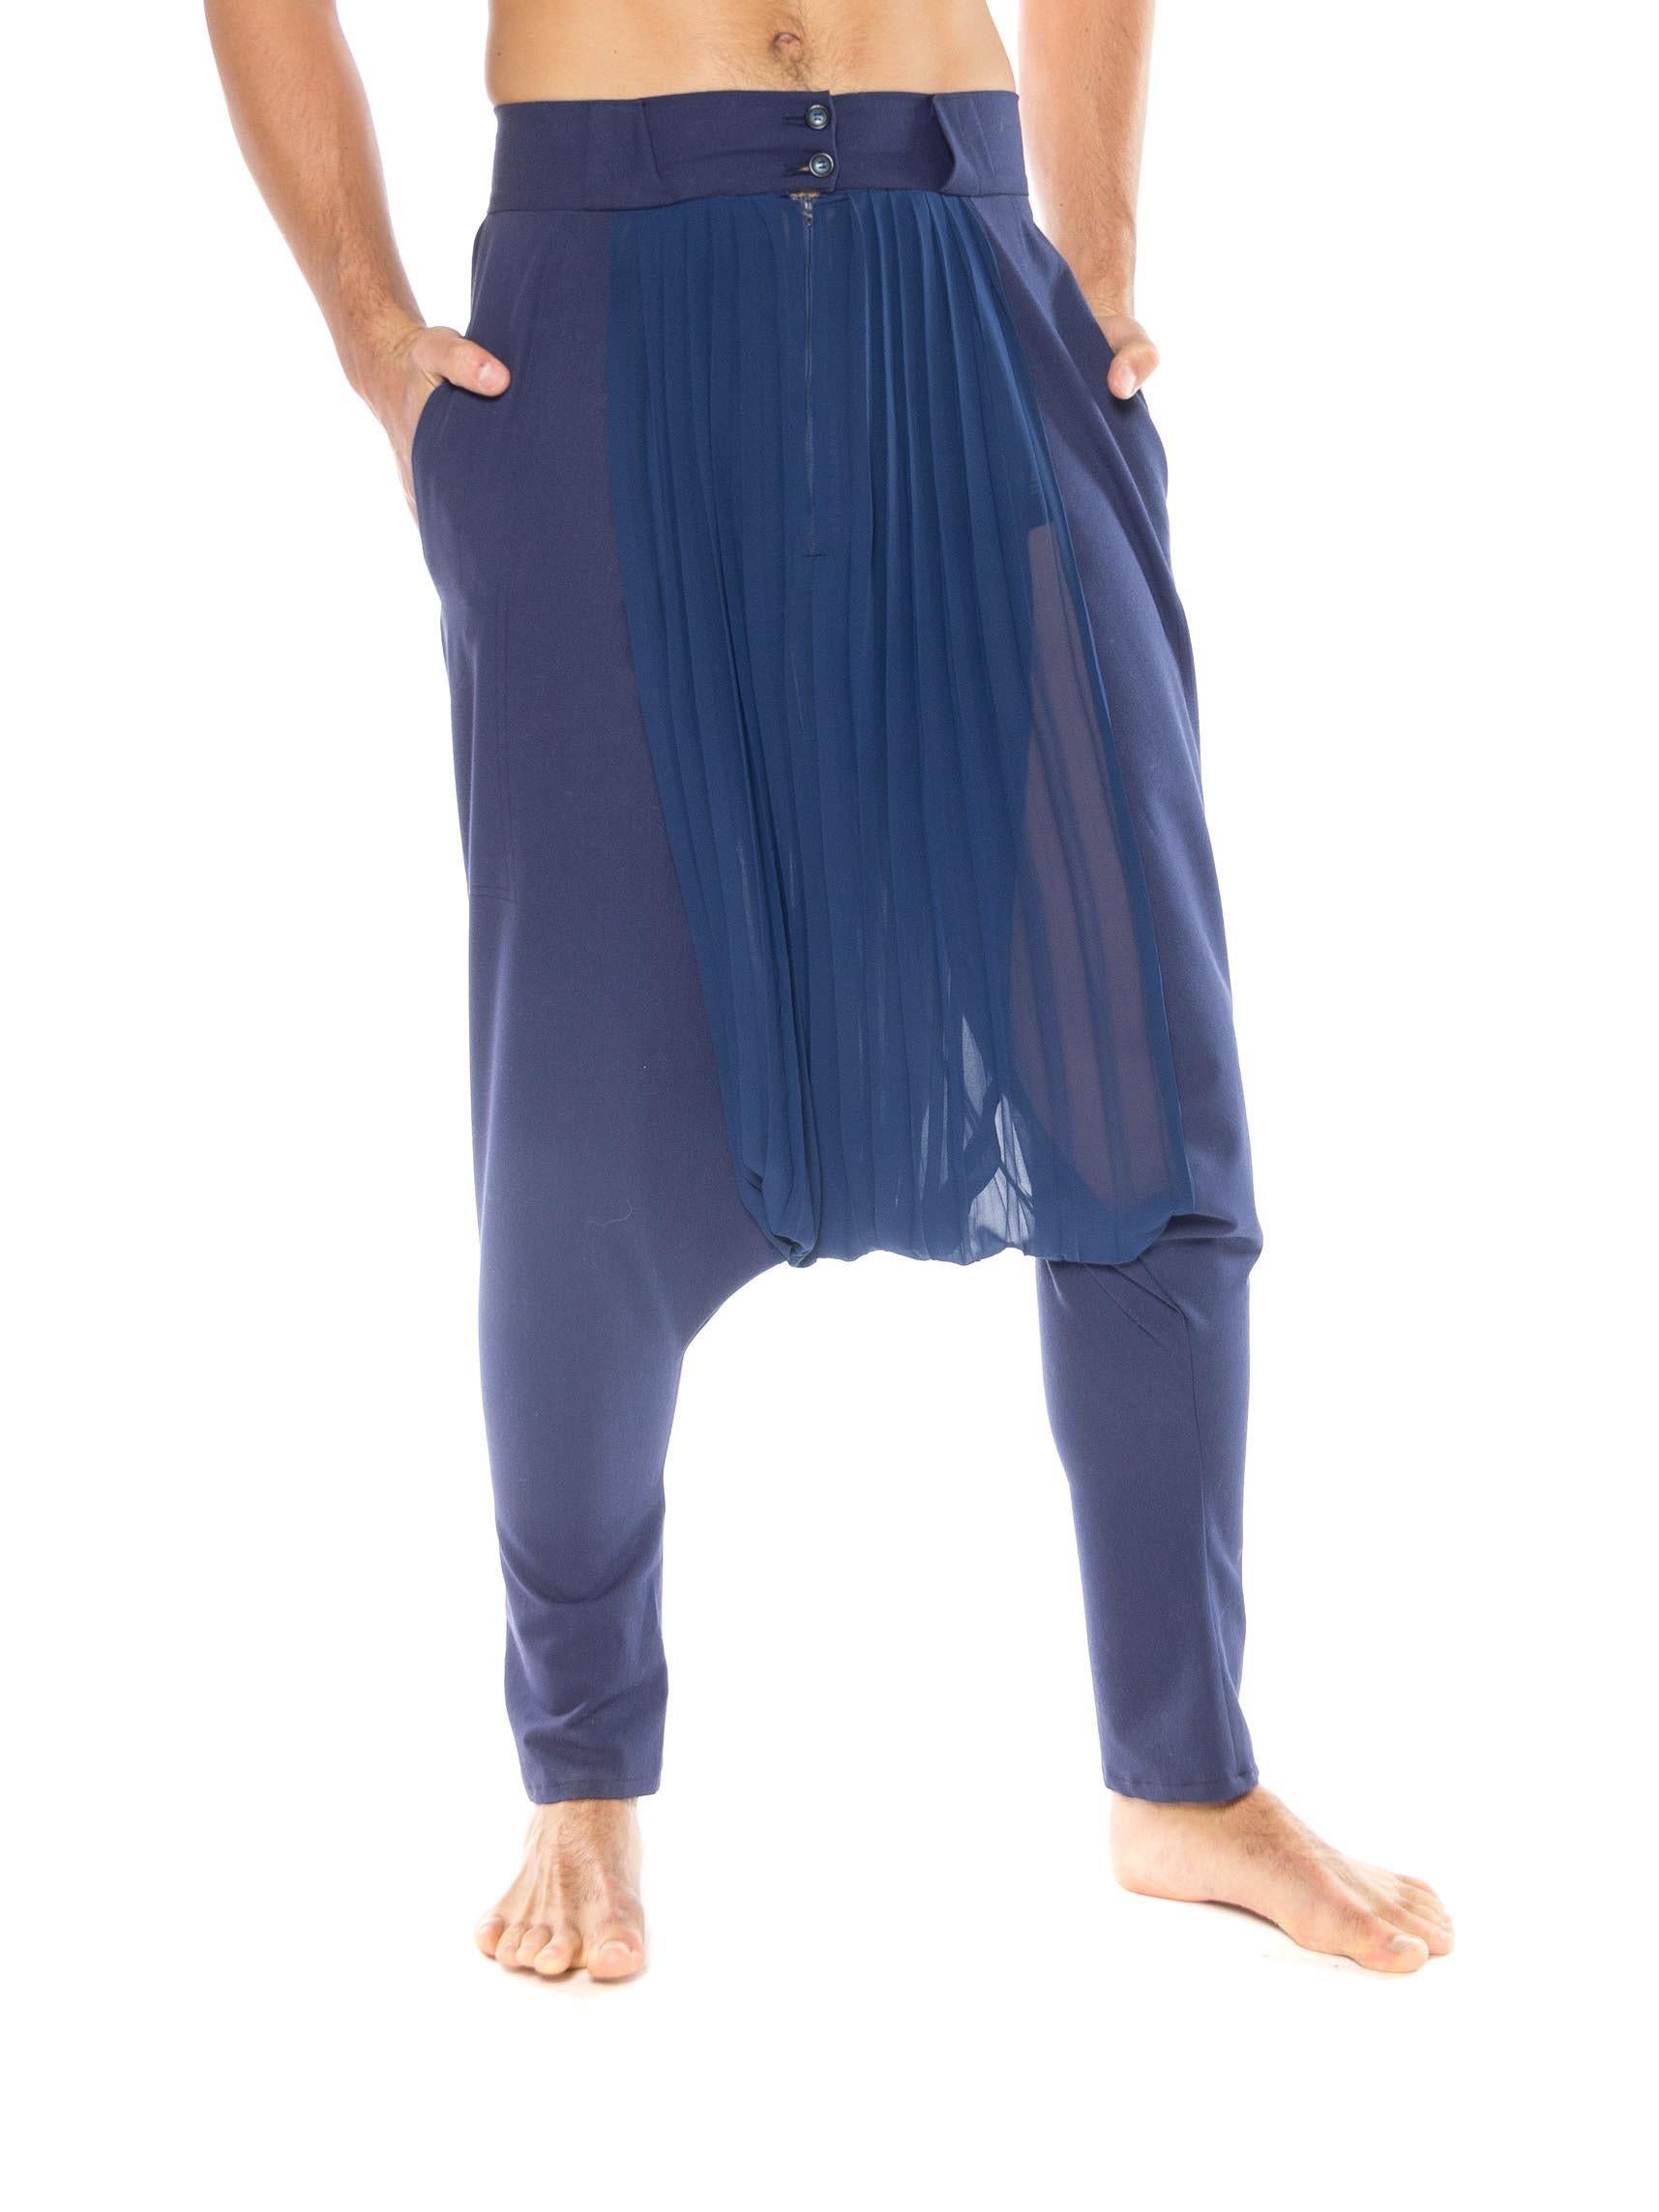 MORPHEW COLLECTION Blue  Pleated Polyester Chiffon & Wool Pants
MORPHEW COLLECTION is made entirely by hand in our NYC Ateliér of rare antique materials sourced from around the globe. Our sustainable vintage materials represent over a century of